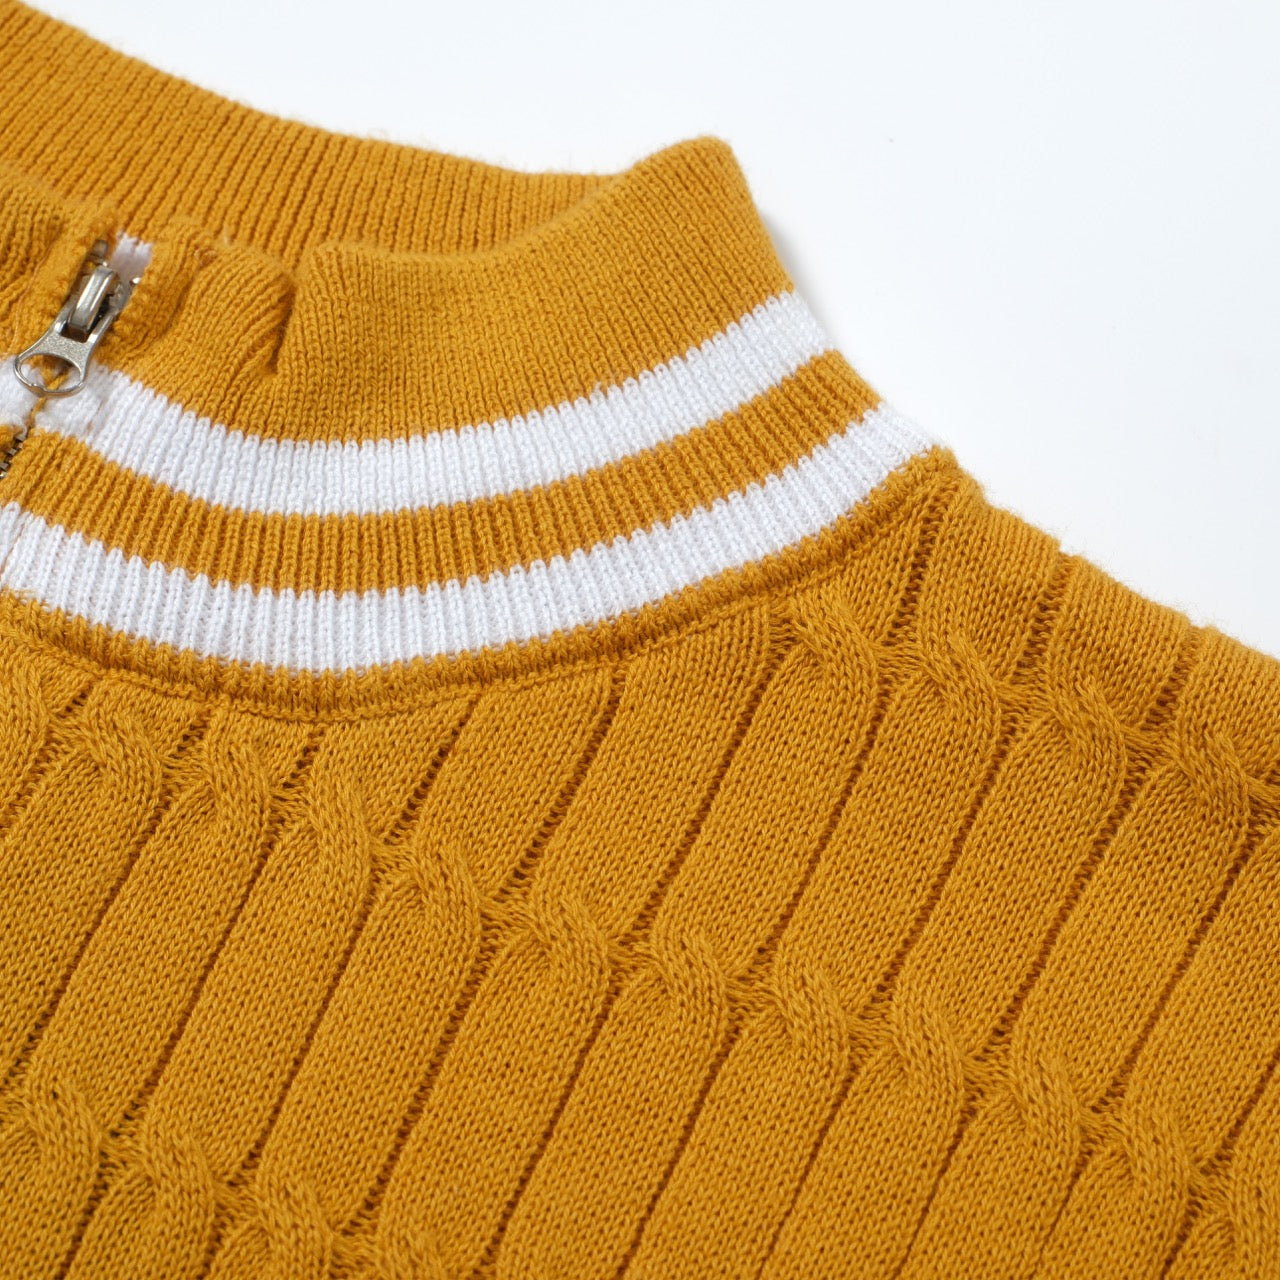 OXKNIT Men Vintage Clothing 1960s Mod Style Casual Yellow Knitted Knit Retro T-Shirt